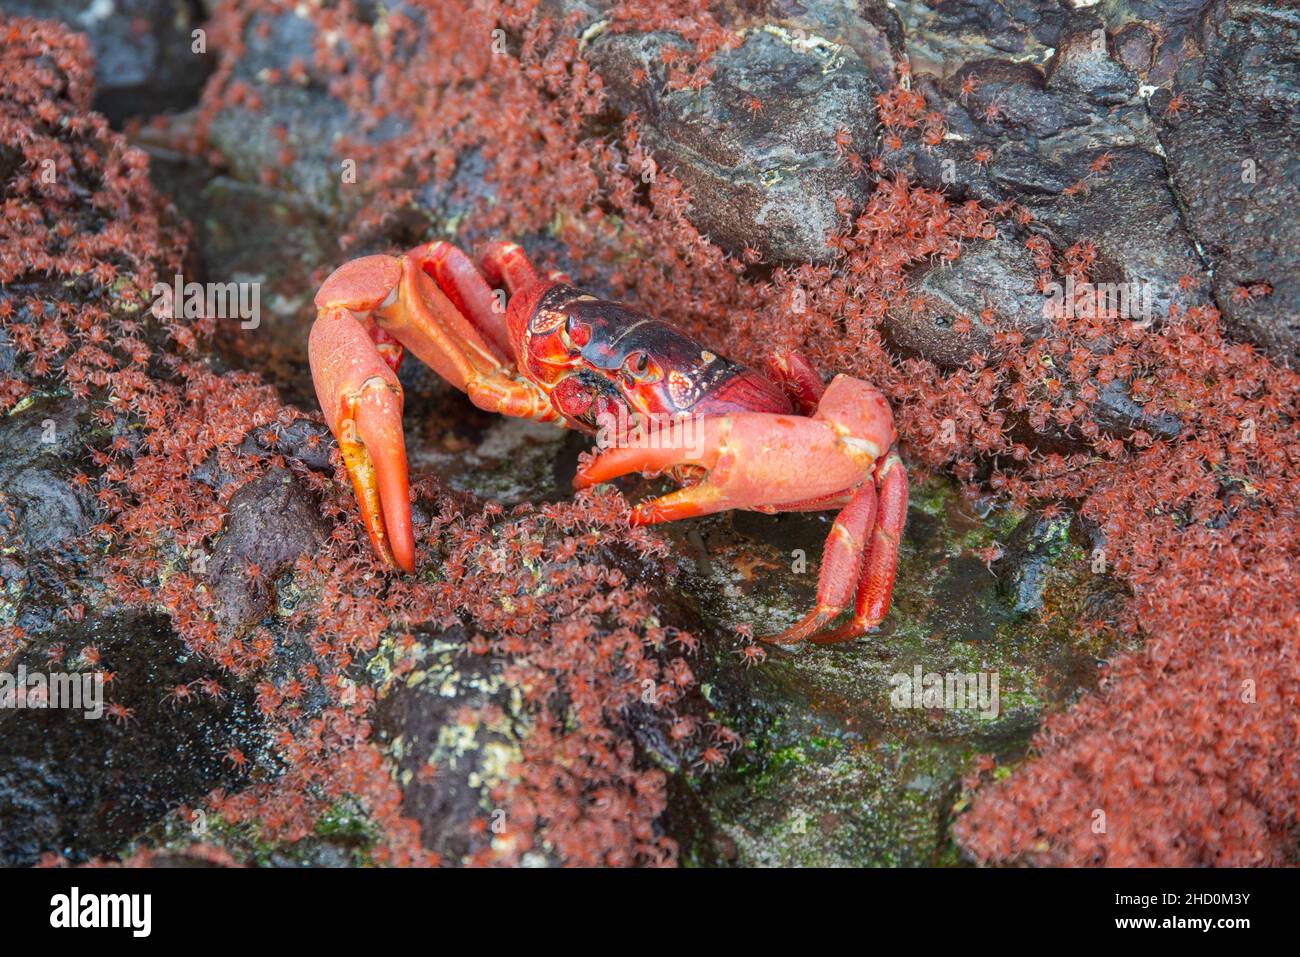 A mature red crab eats baby red crabs returning from the ocean during the annual red crab migration, Ethel Beach on Christmas Island. Stock Photo